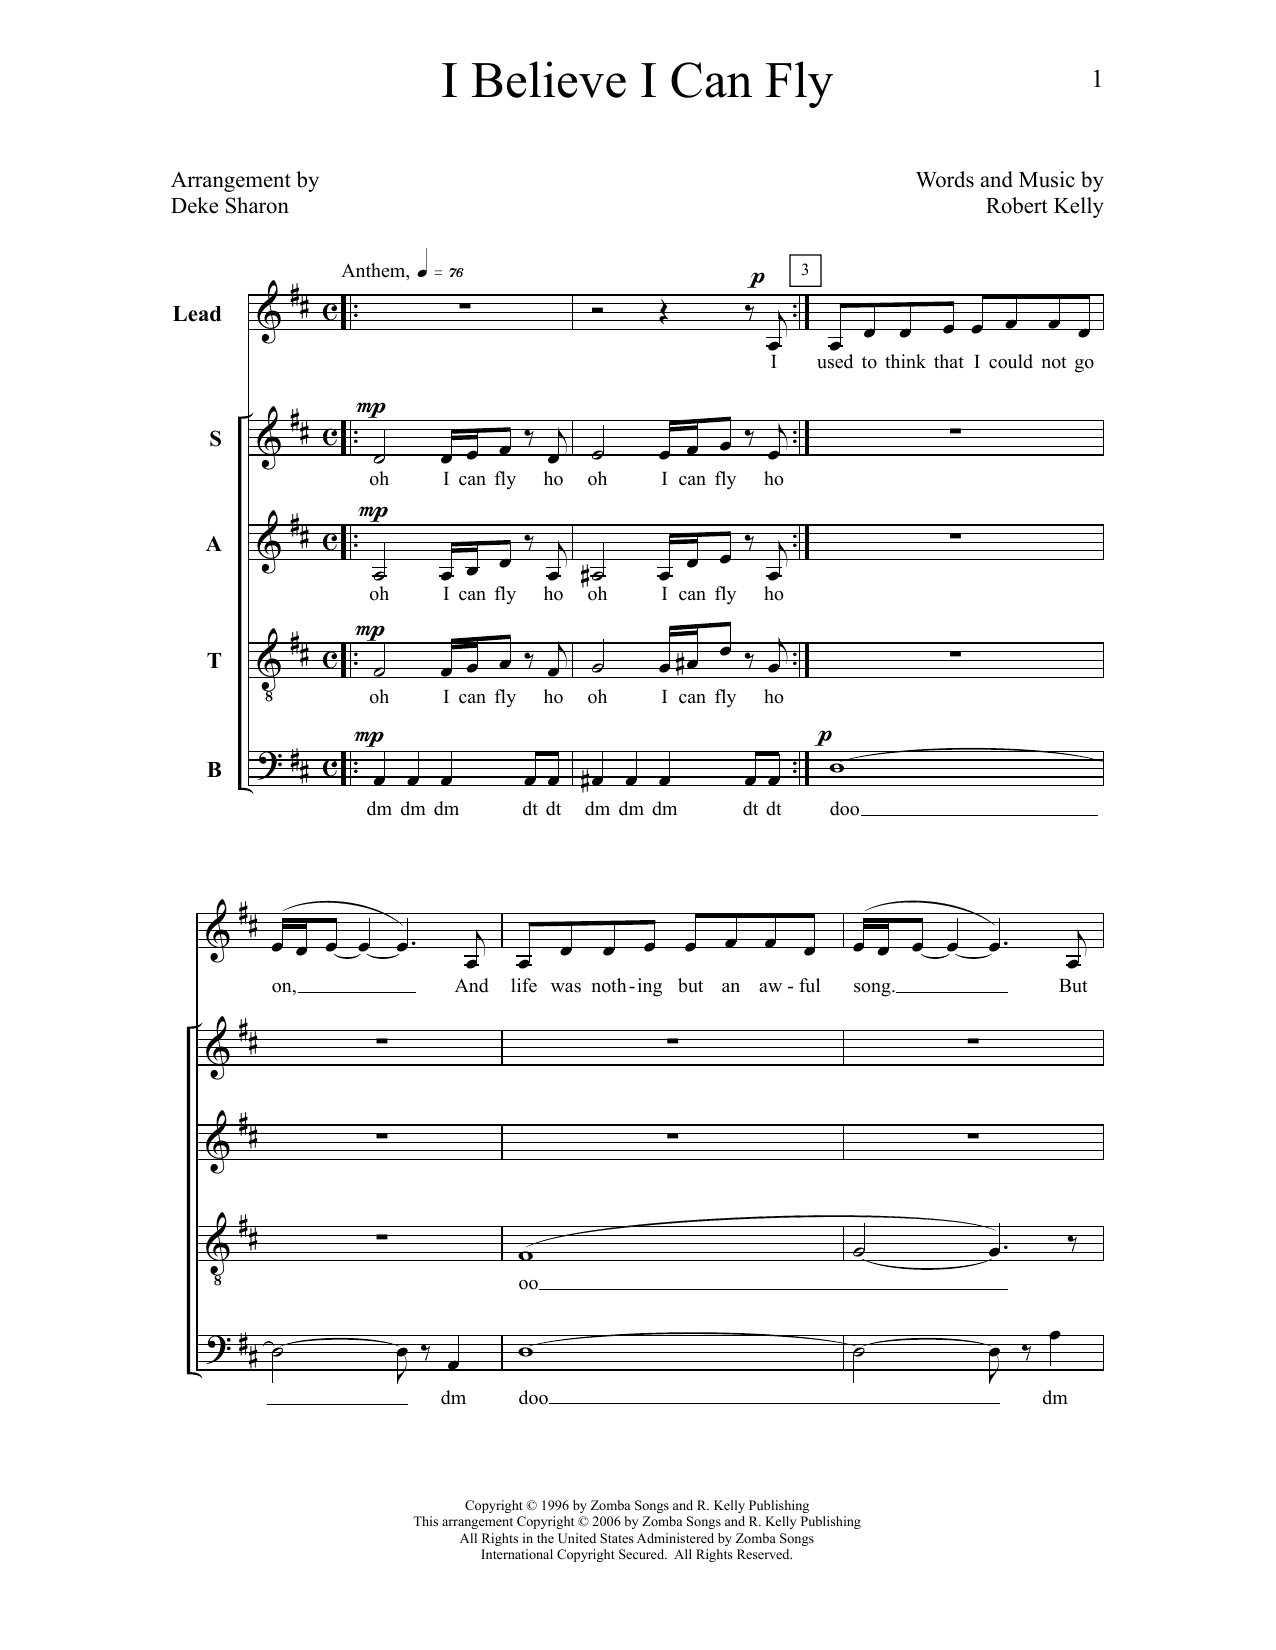 Deke Sharon I Believe I Can Fly sheet music notes and chords. Download Printable PDF.